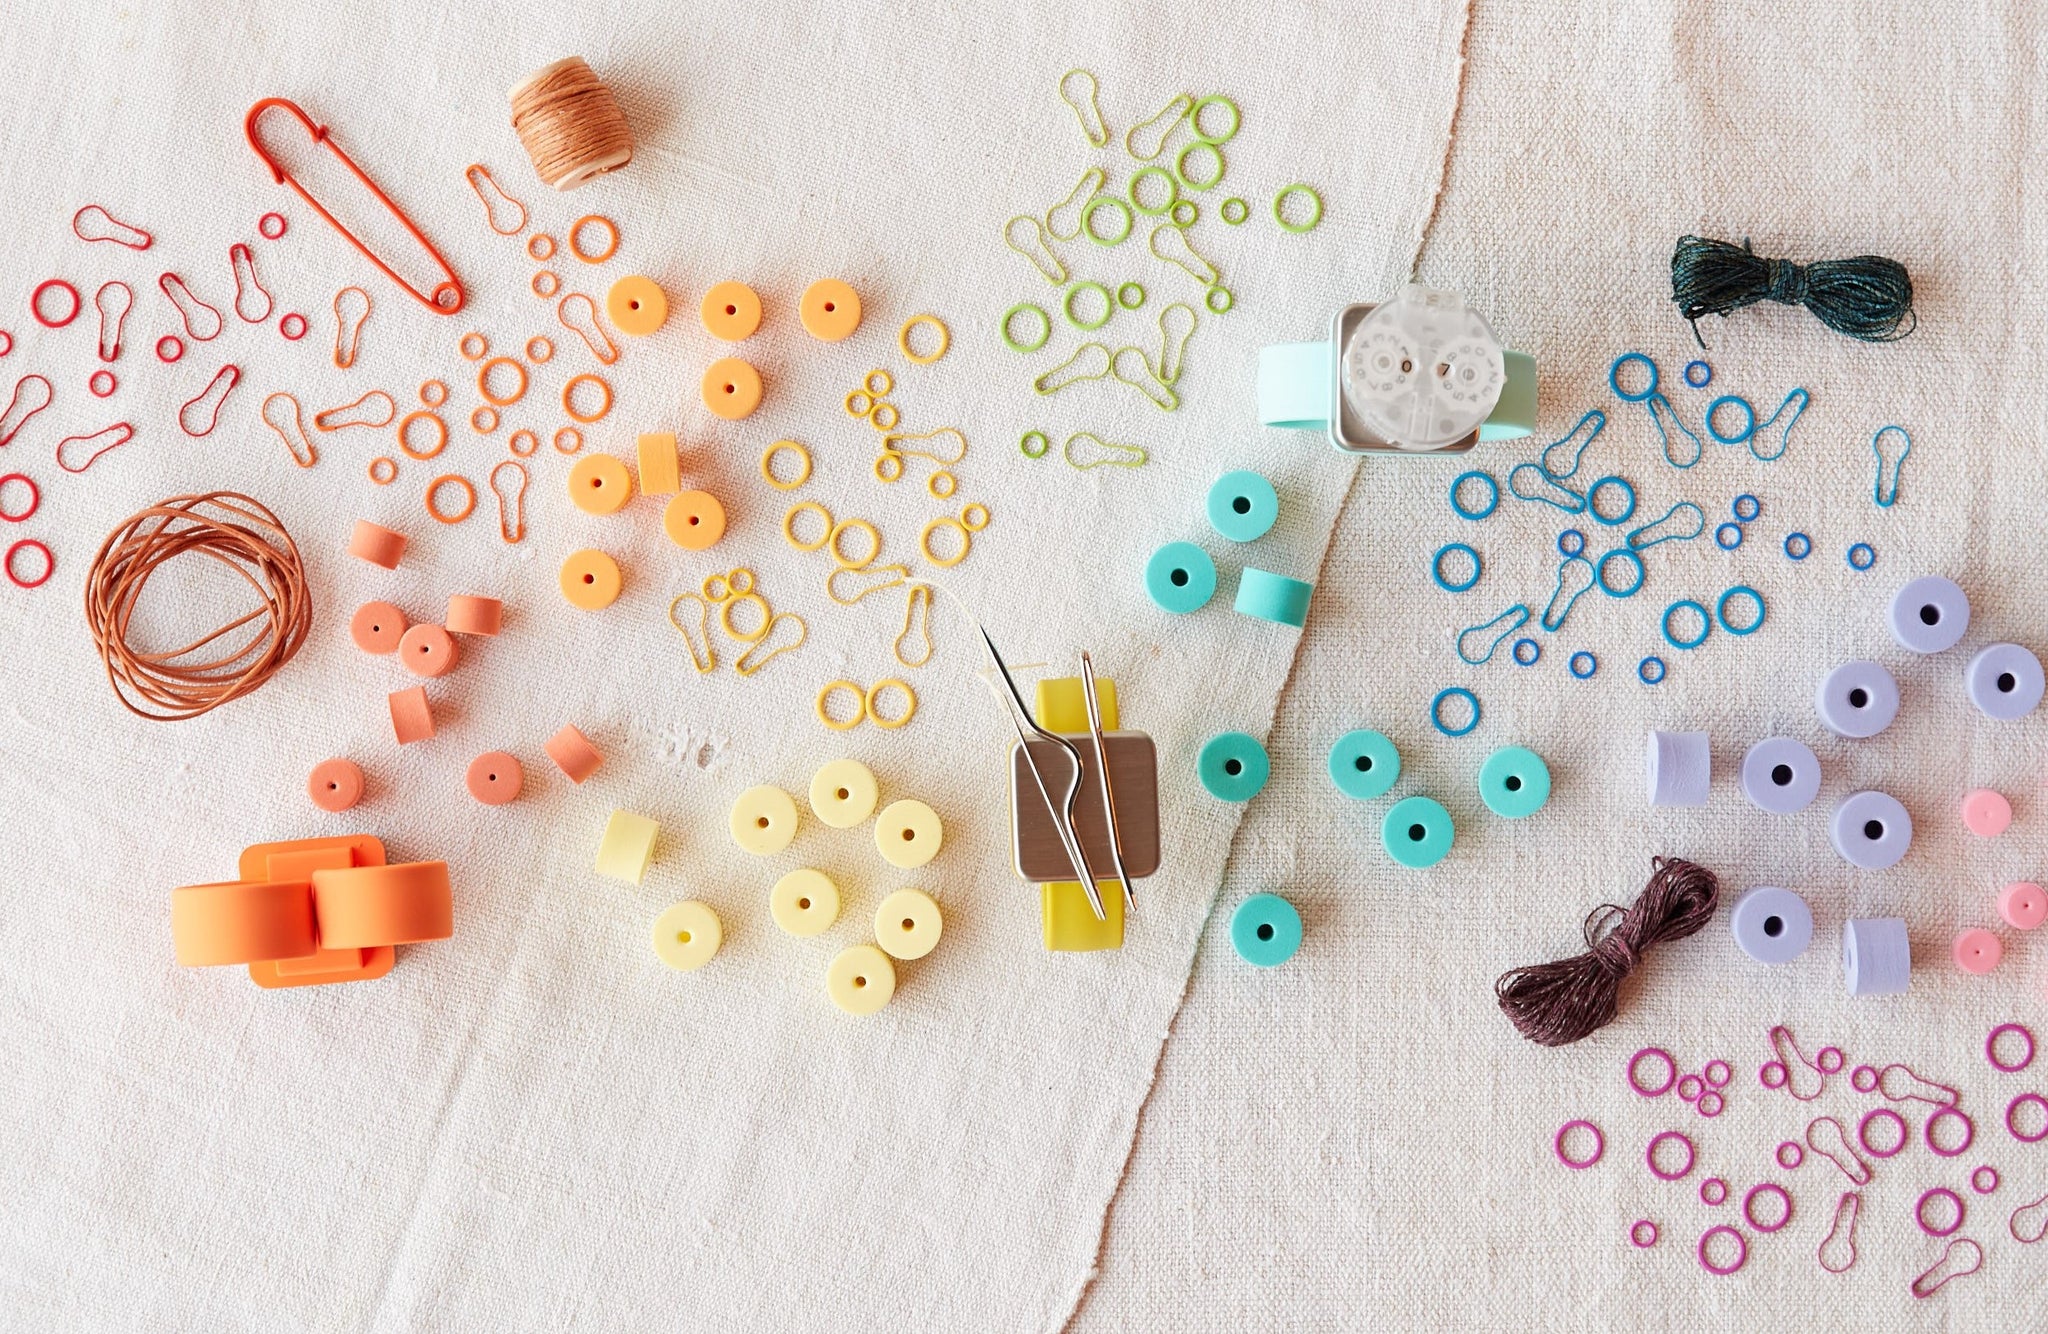 Flight Of The Stitch Markers, Cocoknits, Knitting and Crochet Accessories,  Notions – Hue Loco